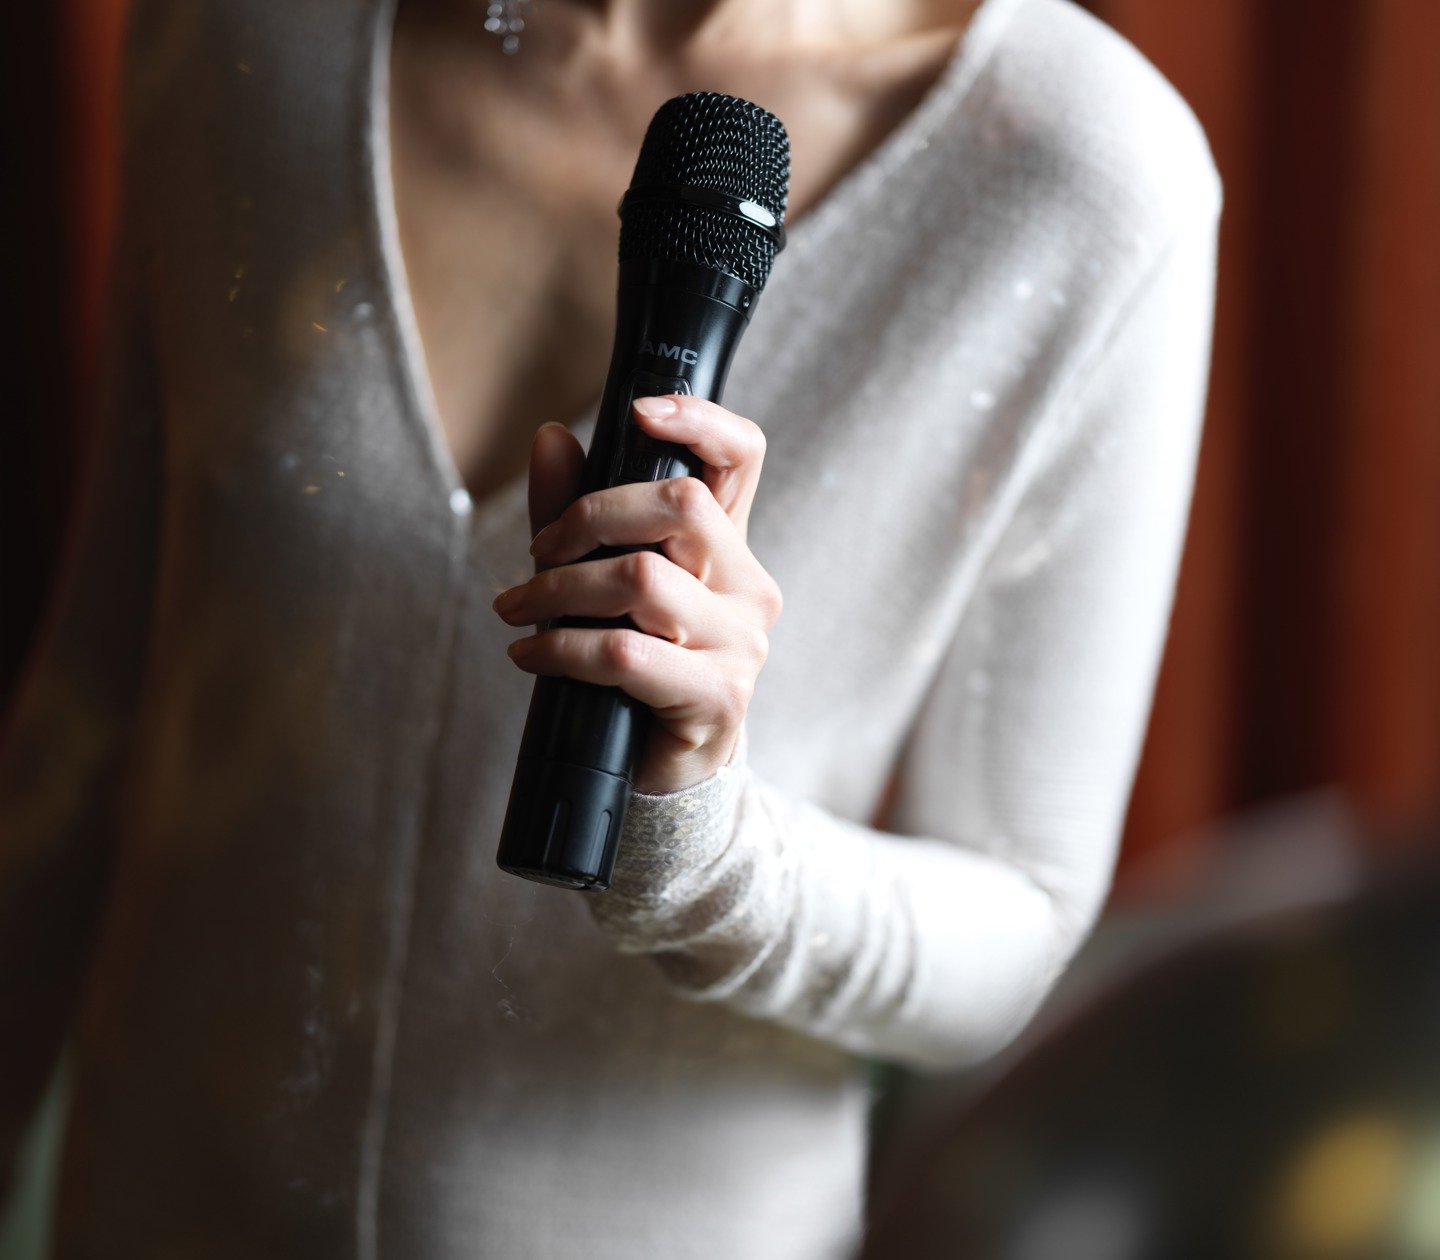 A woman in a sparkling dress holds a microphone